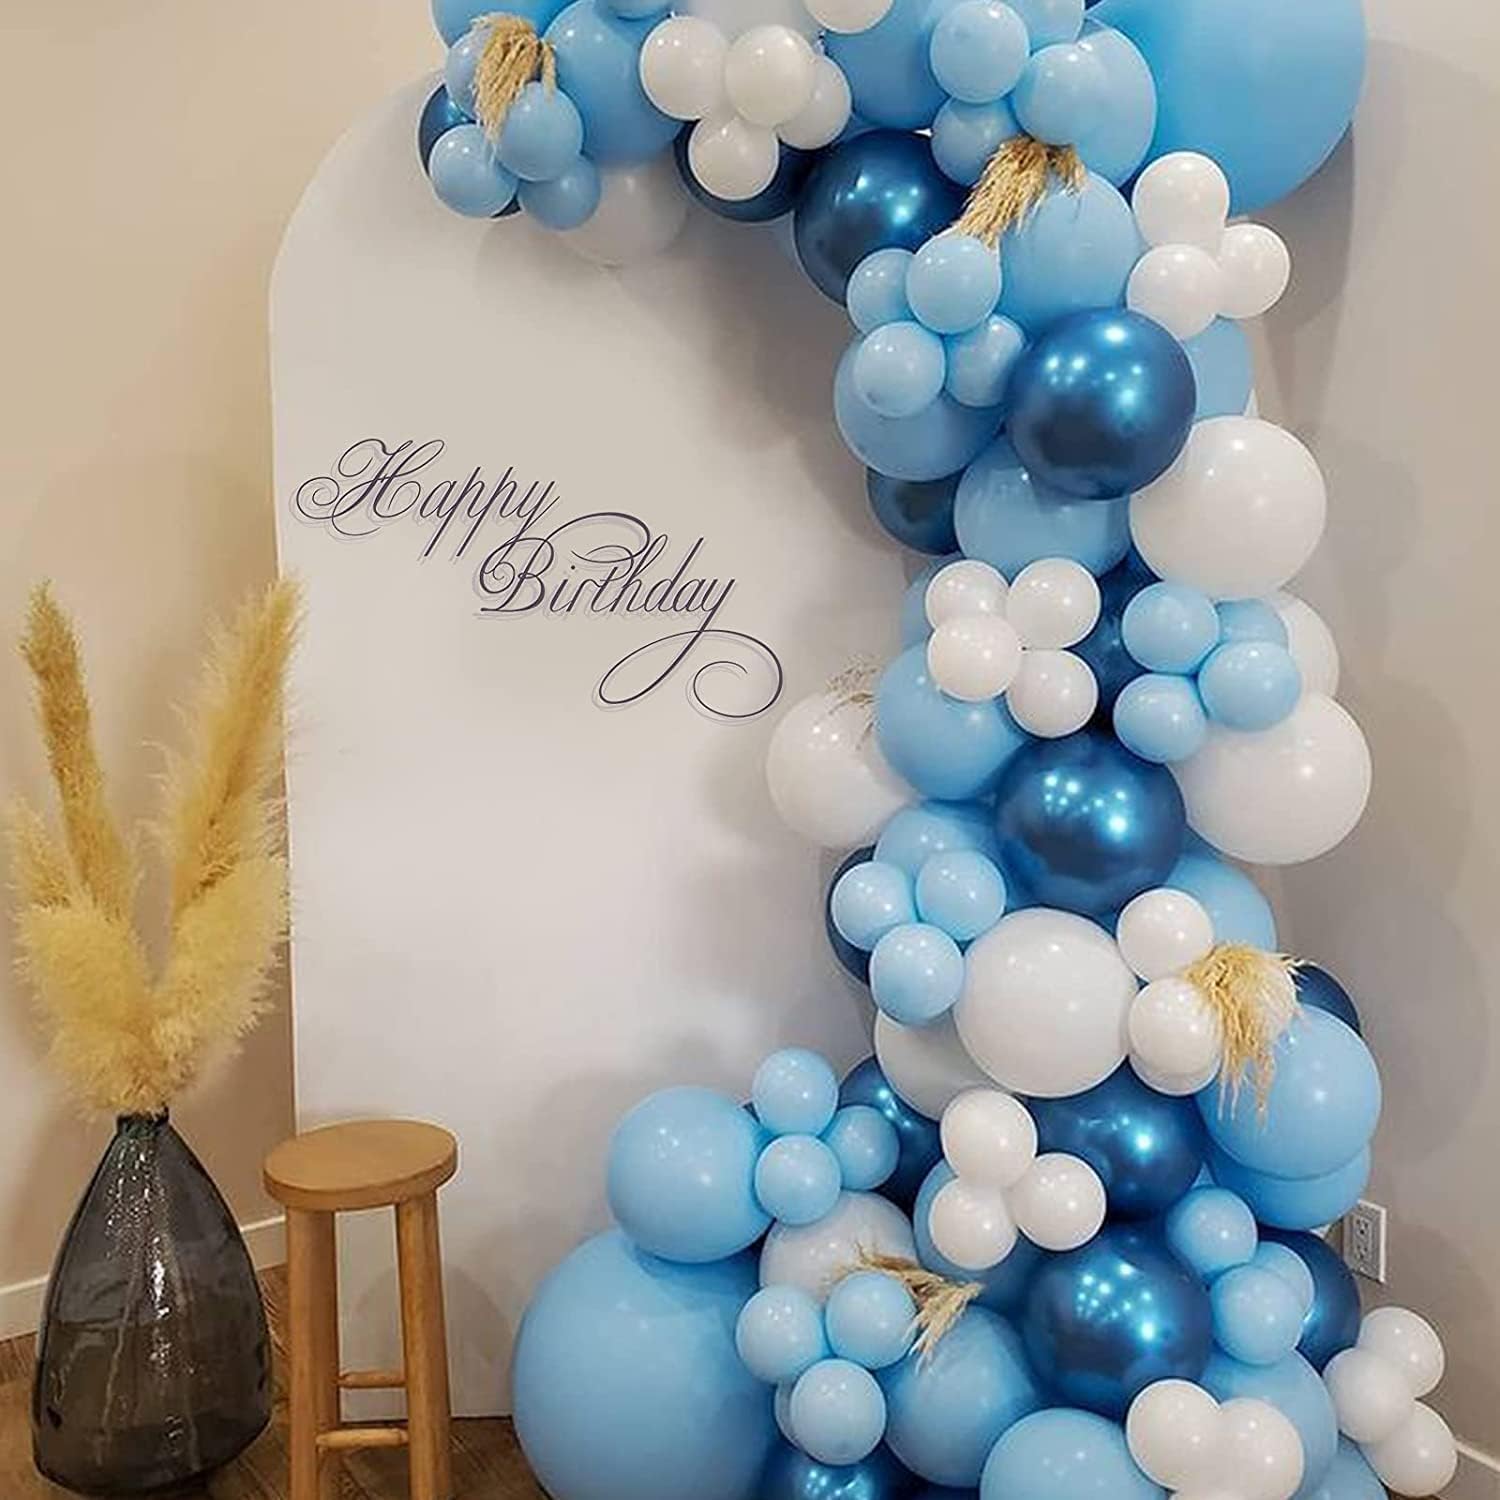 AOLOA Blue Balloon Set - 60PCS 12 Inches Metallic Chrome Blue Pearl Blue Latex Balloons with Ribbons for Bridal Shower, Blue Wedding, Baby Shower, Blue Birthday Party Ombre Decor